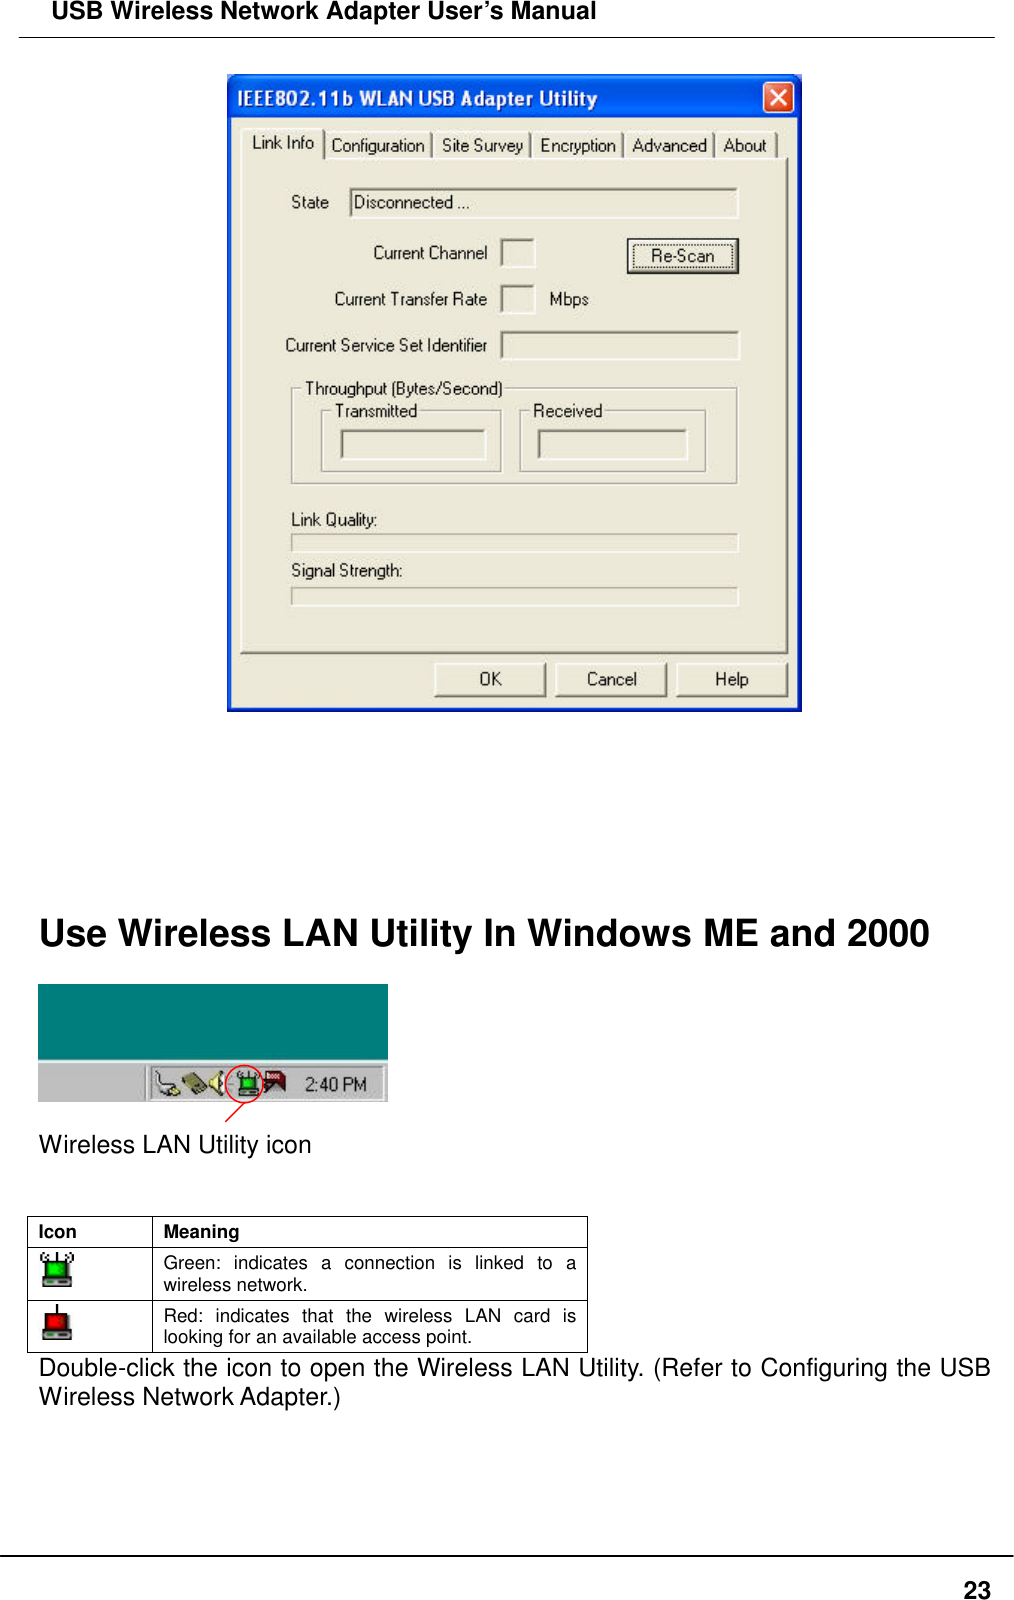  USB Wireless Network Adapter User’s Manual  23        Use Wireless LAN Utility In Windows ME and 2000    Wireless LAN Utility icon   Icon Meaning  Green: indicates a connection is linked to a wireless network.  Red: indicates that the wireless LAN card is looking for an available access point. Double-click the icon to open the Wireless LAN Utility. (Refer to Configuring the USB Wireless Network Adapter.)    